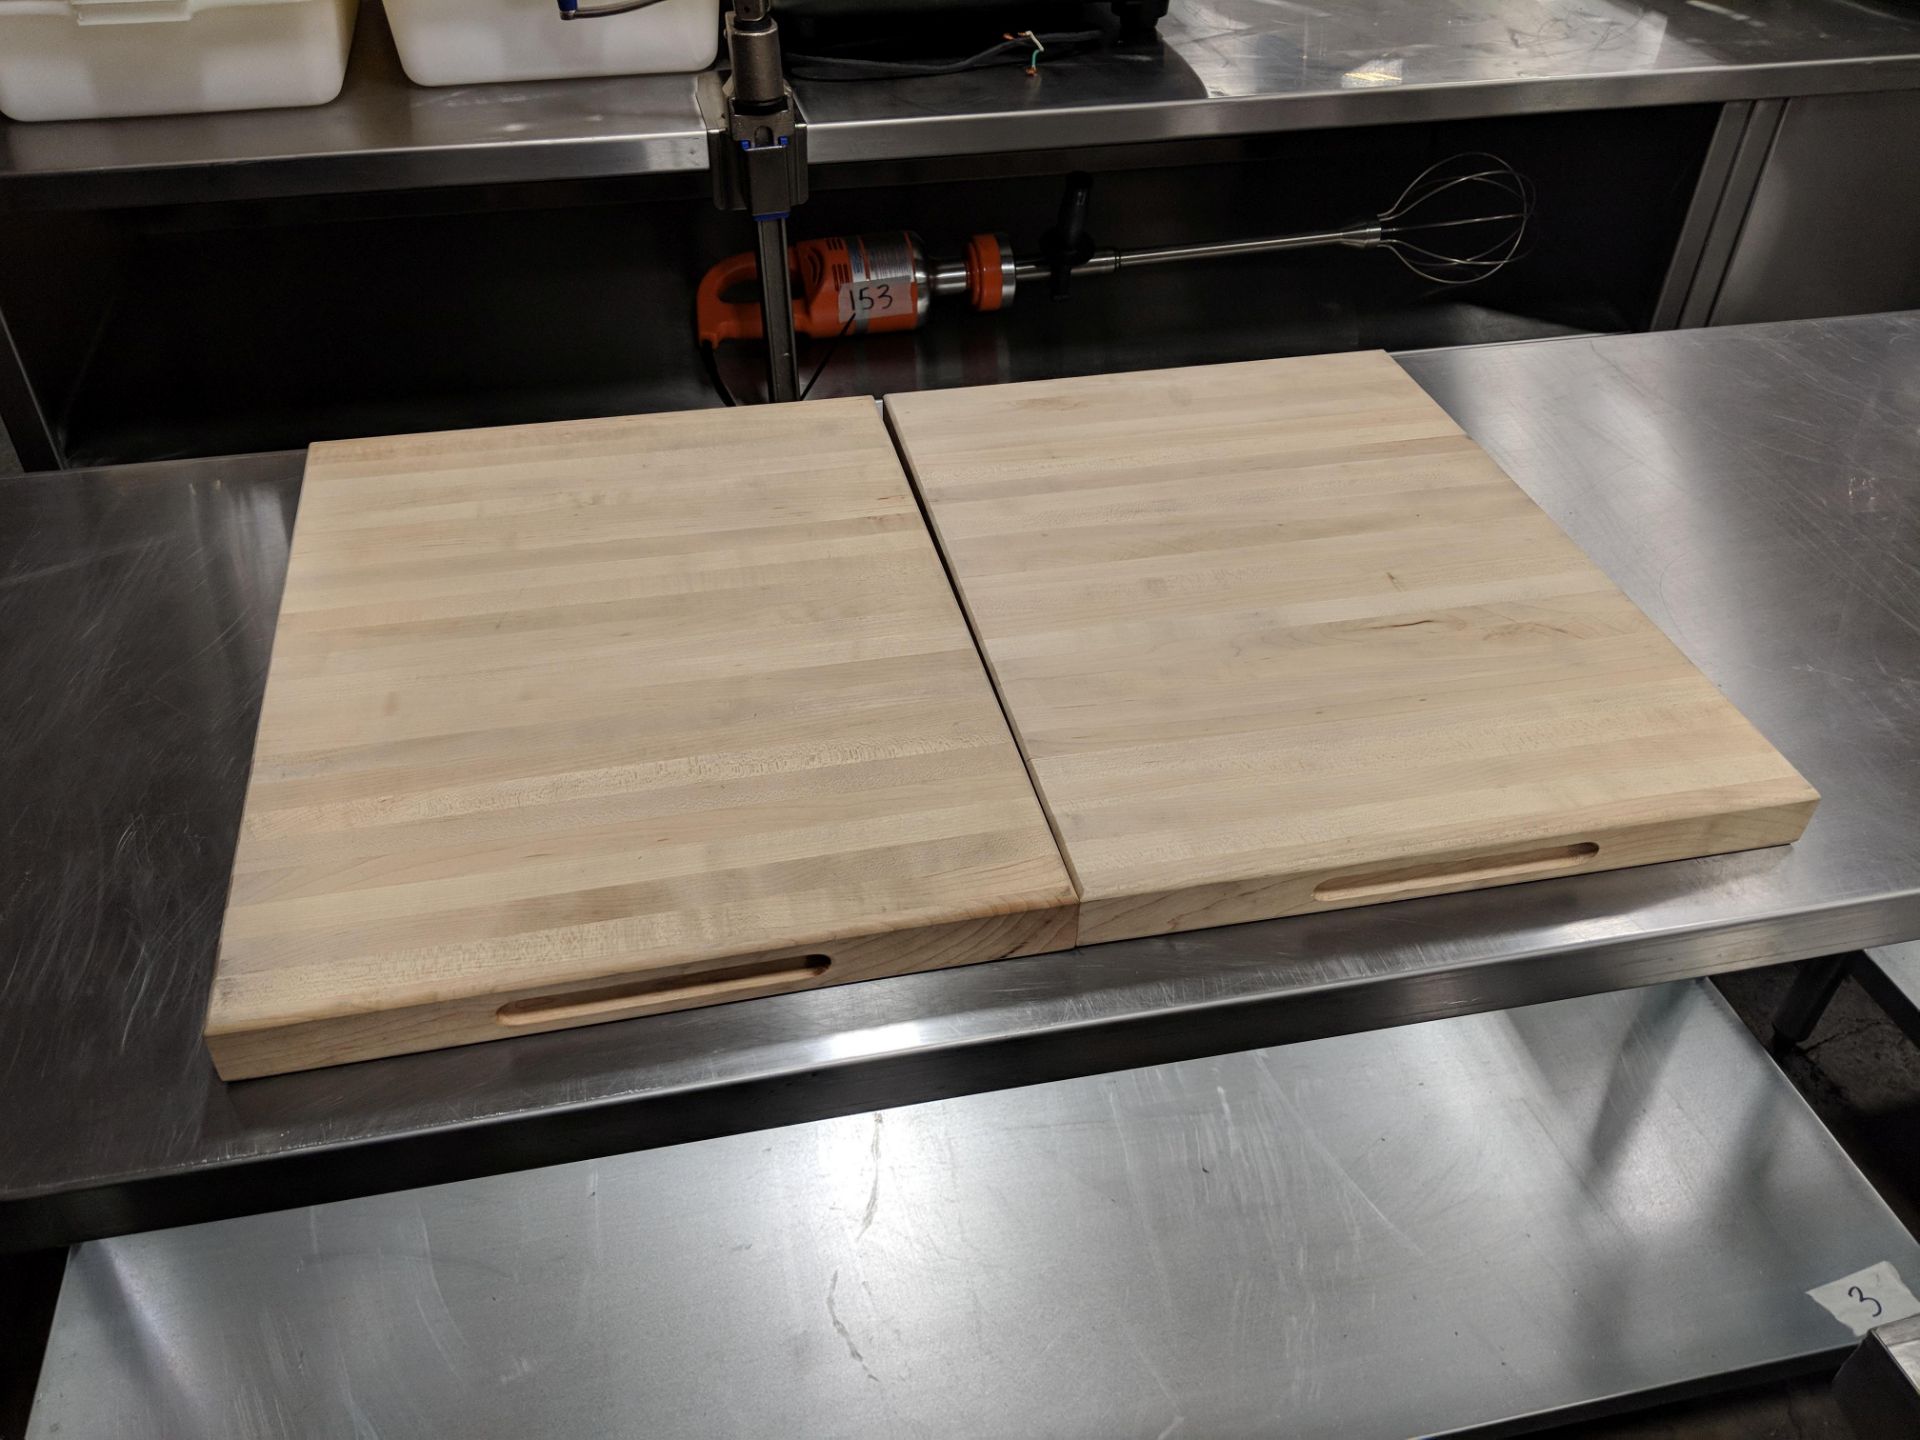 20" x 15" x 1.75" Solid Maple Cutting Boards - Lot of 2 - Image 2 of 2